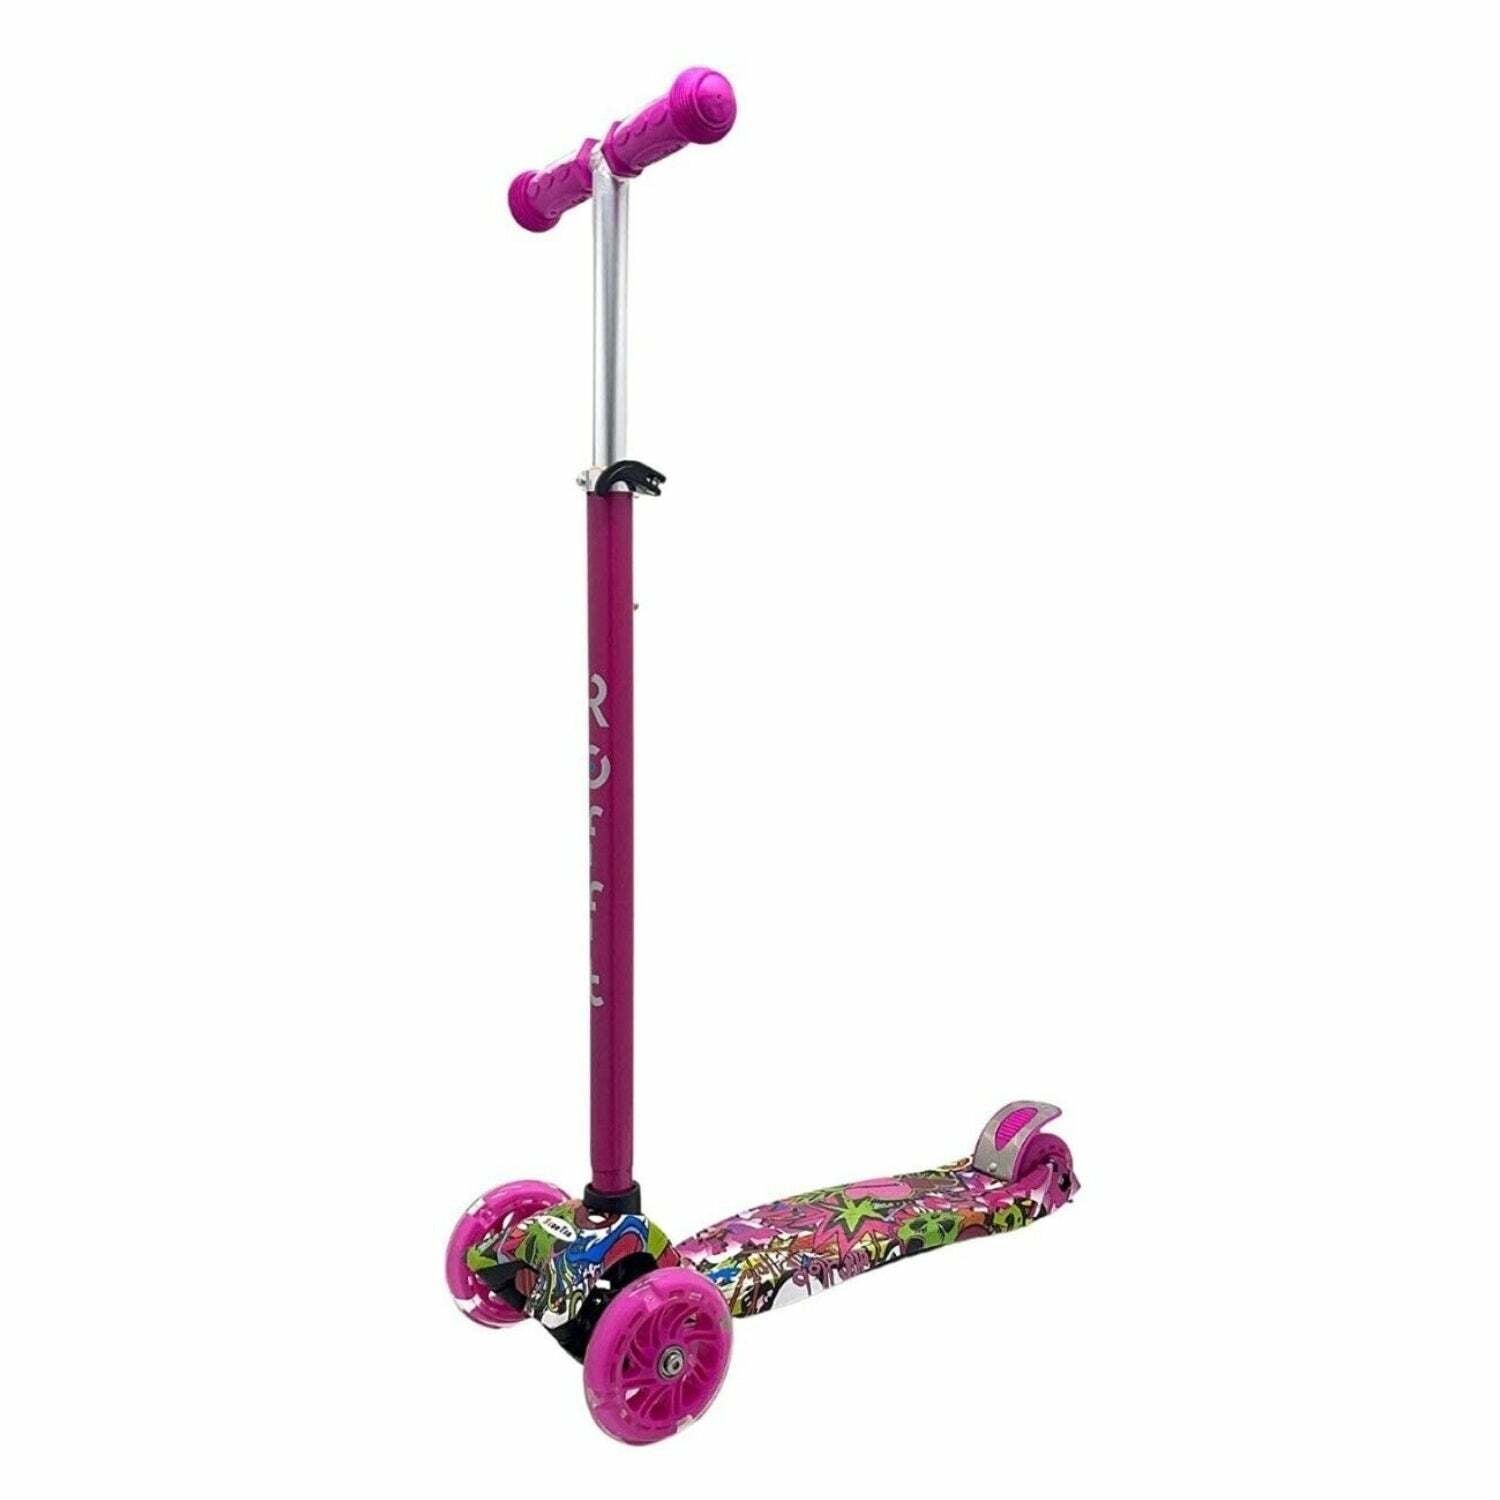 ROFFT - Kick Scooter Maxi, 3 Wheel, Lean-to-Steer, LED, Kids Ages 6-12 Graffiti Pink